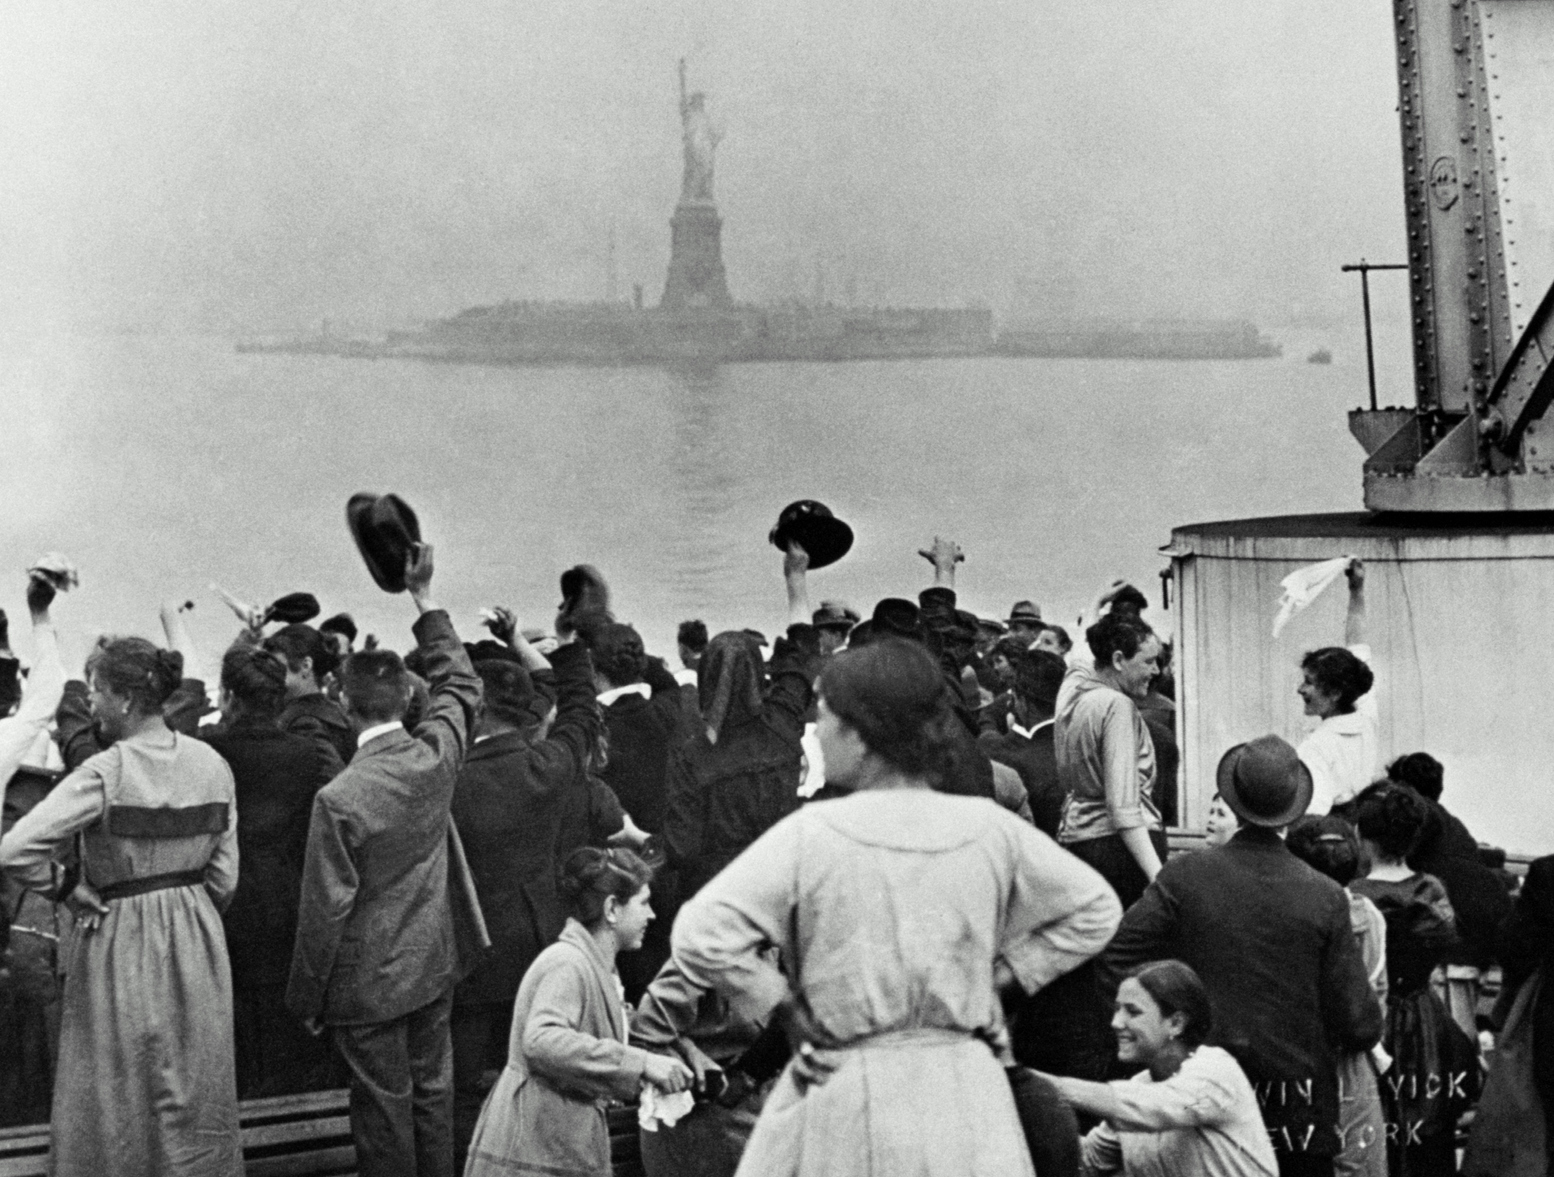 View from ship pulling into Ellis Island, c. 1900